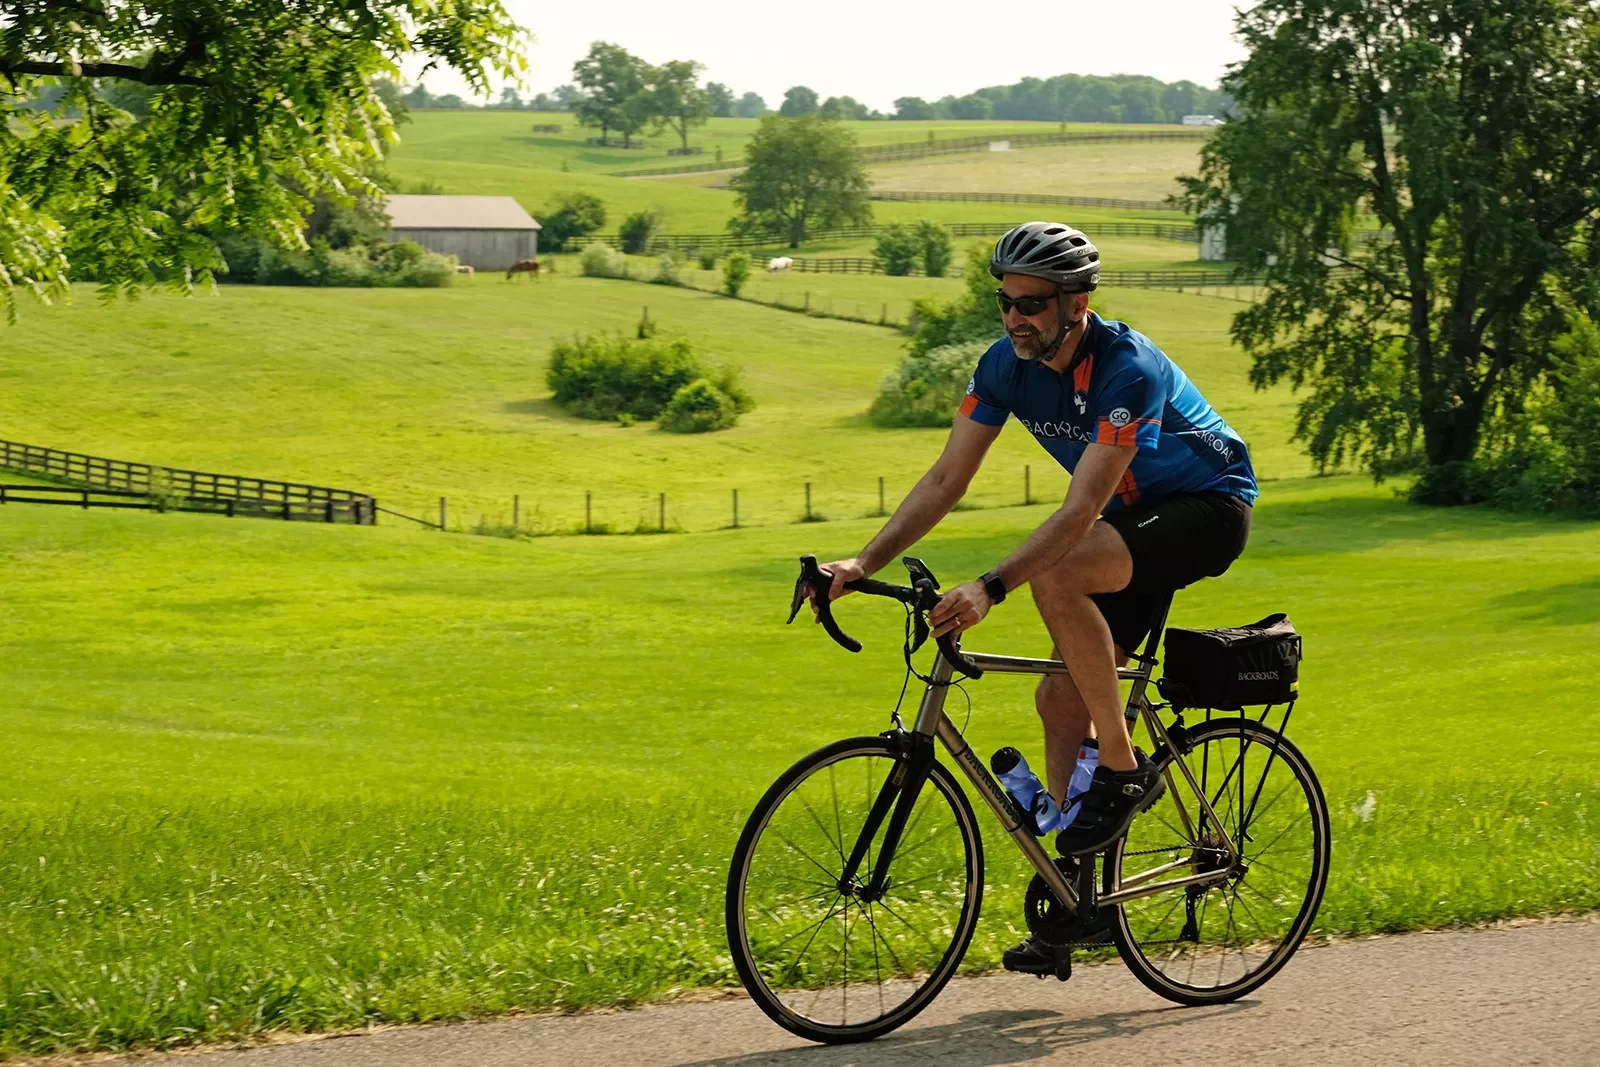 Guest cycling past farmhouses, grassy meadow.